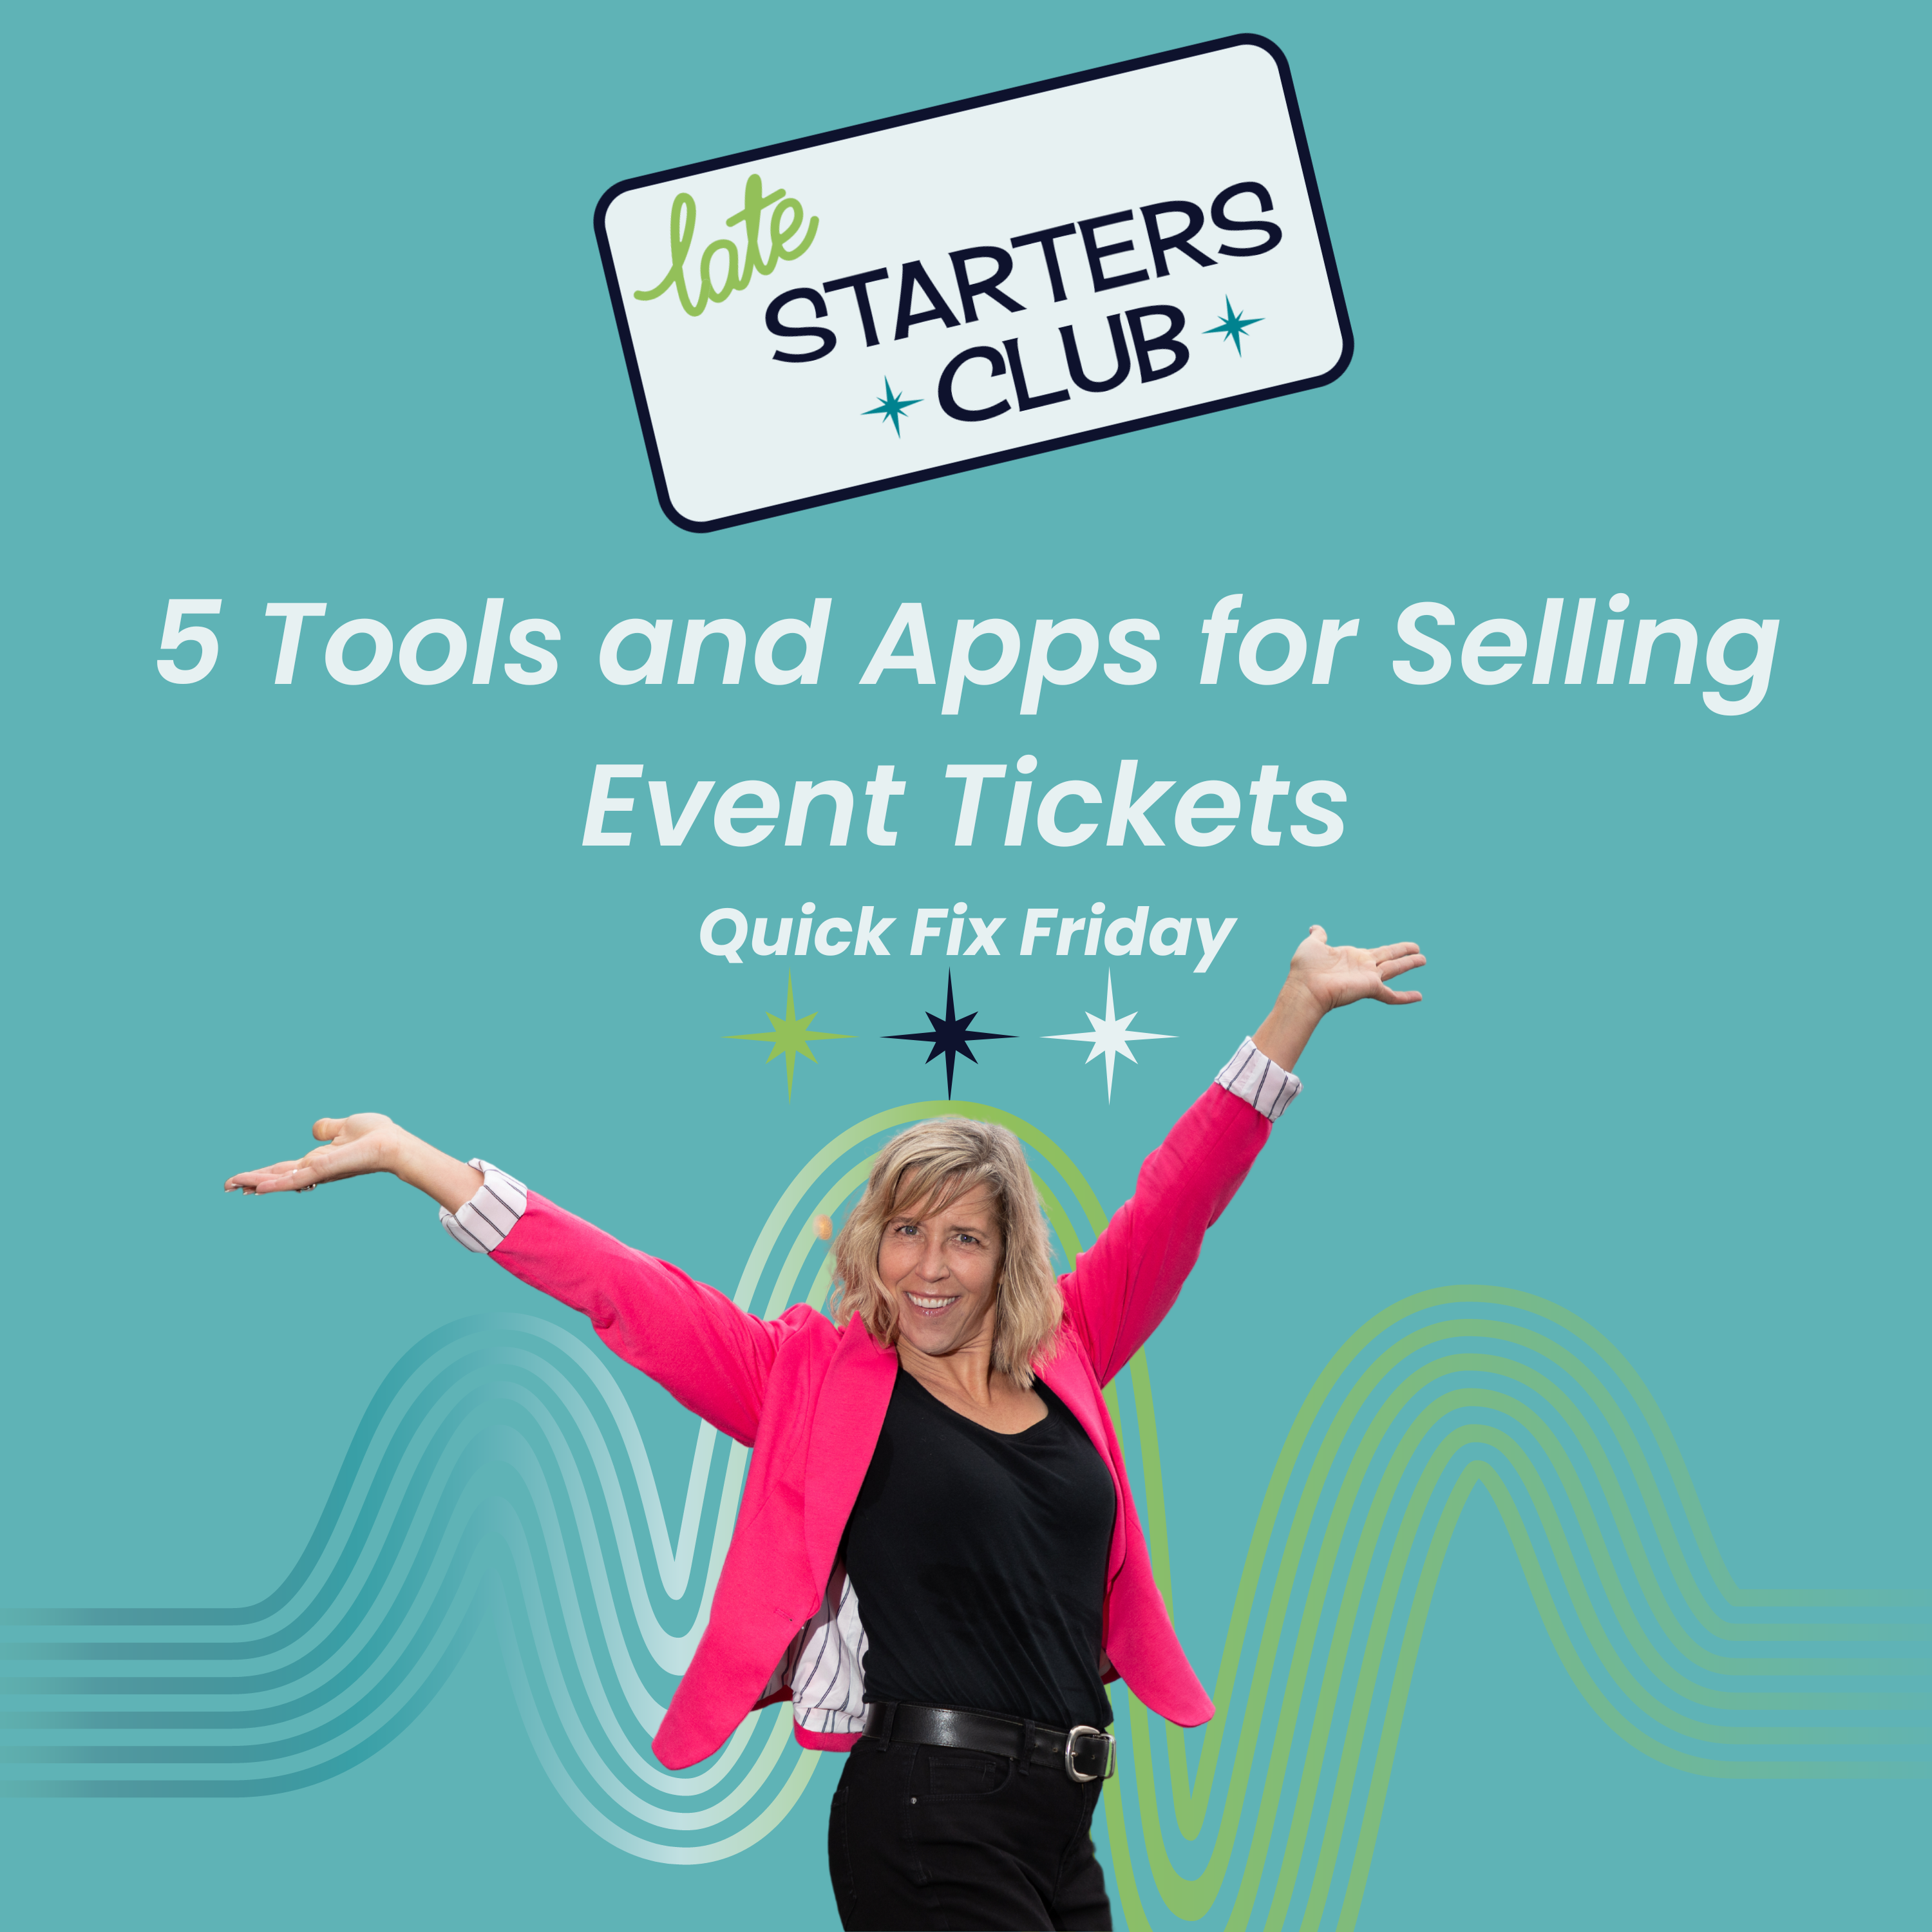 97: 5 Tools and Apps for Selling Event Tickets – Quick Fix Friday